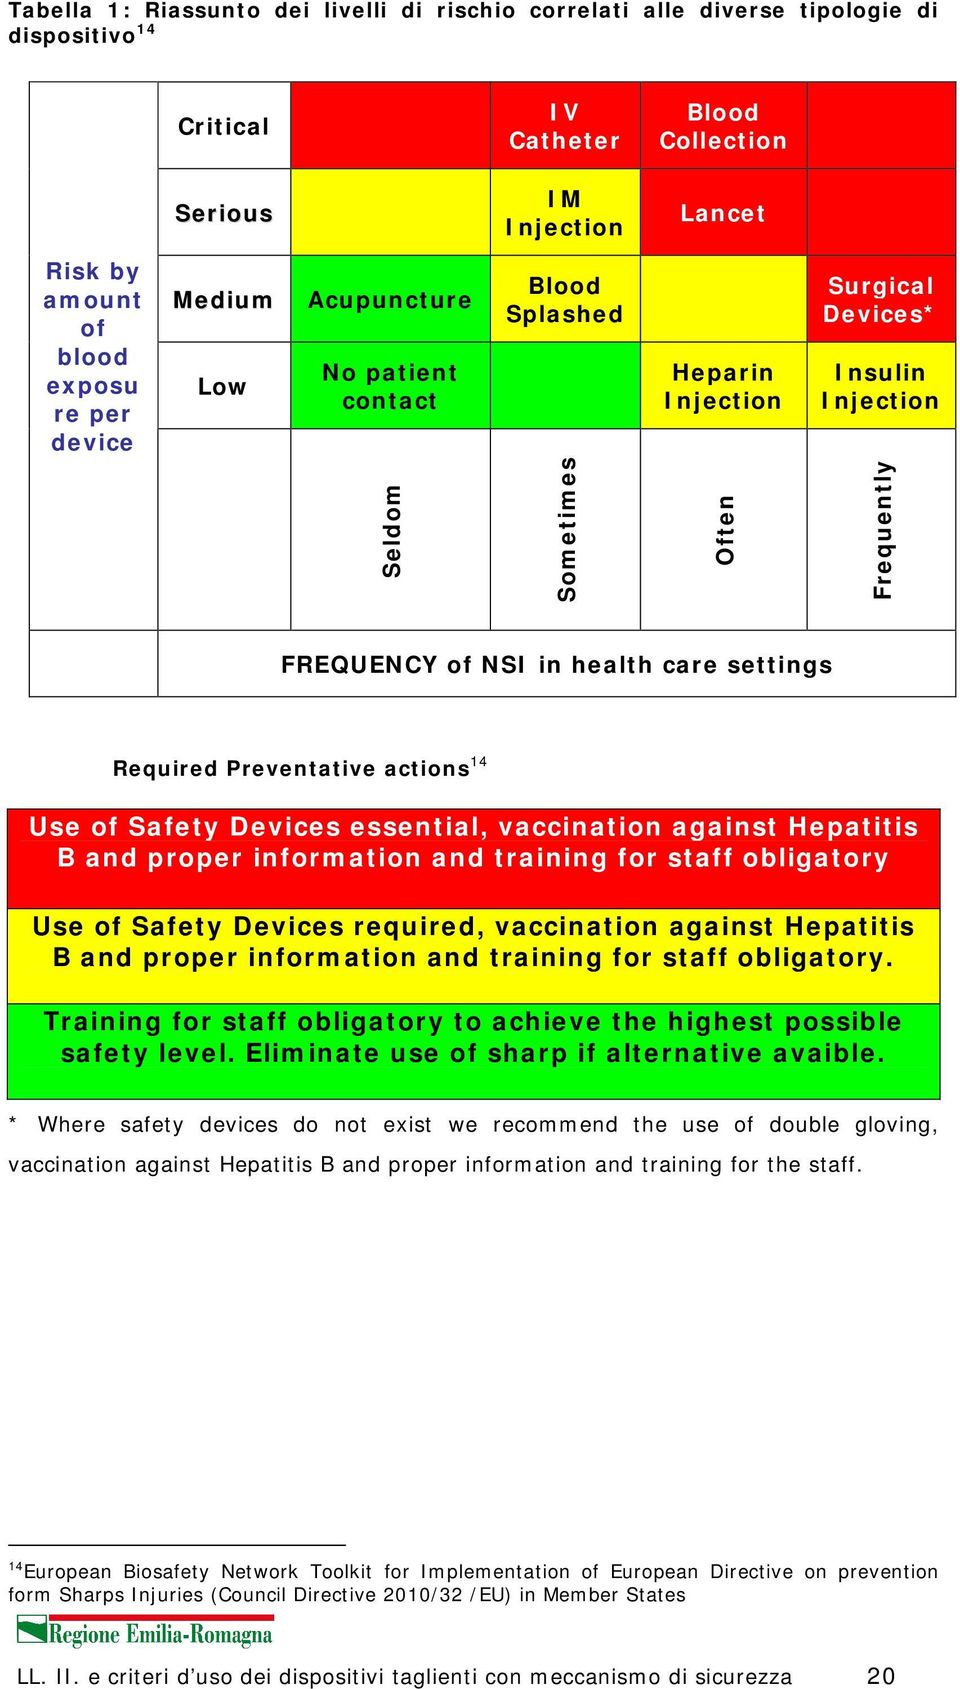 Required Preventative actions 14 Use of Safety Devices essential, vaccination against Hepatitis B and proper information and training for staff obligatory Use of Safety Devices required, vaccination